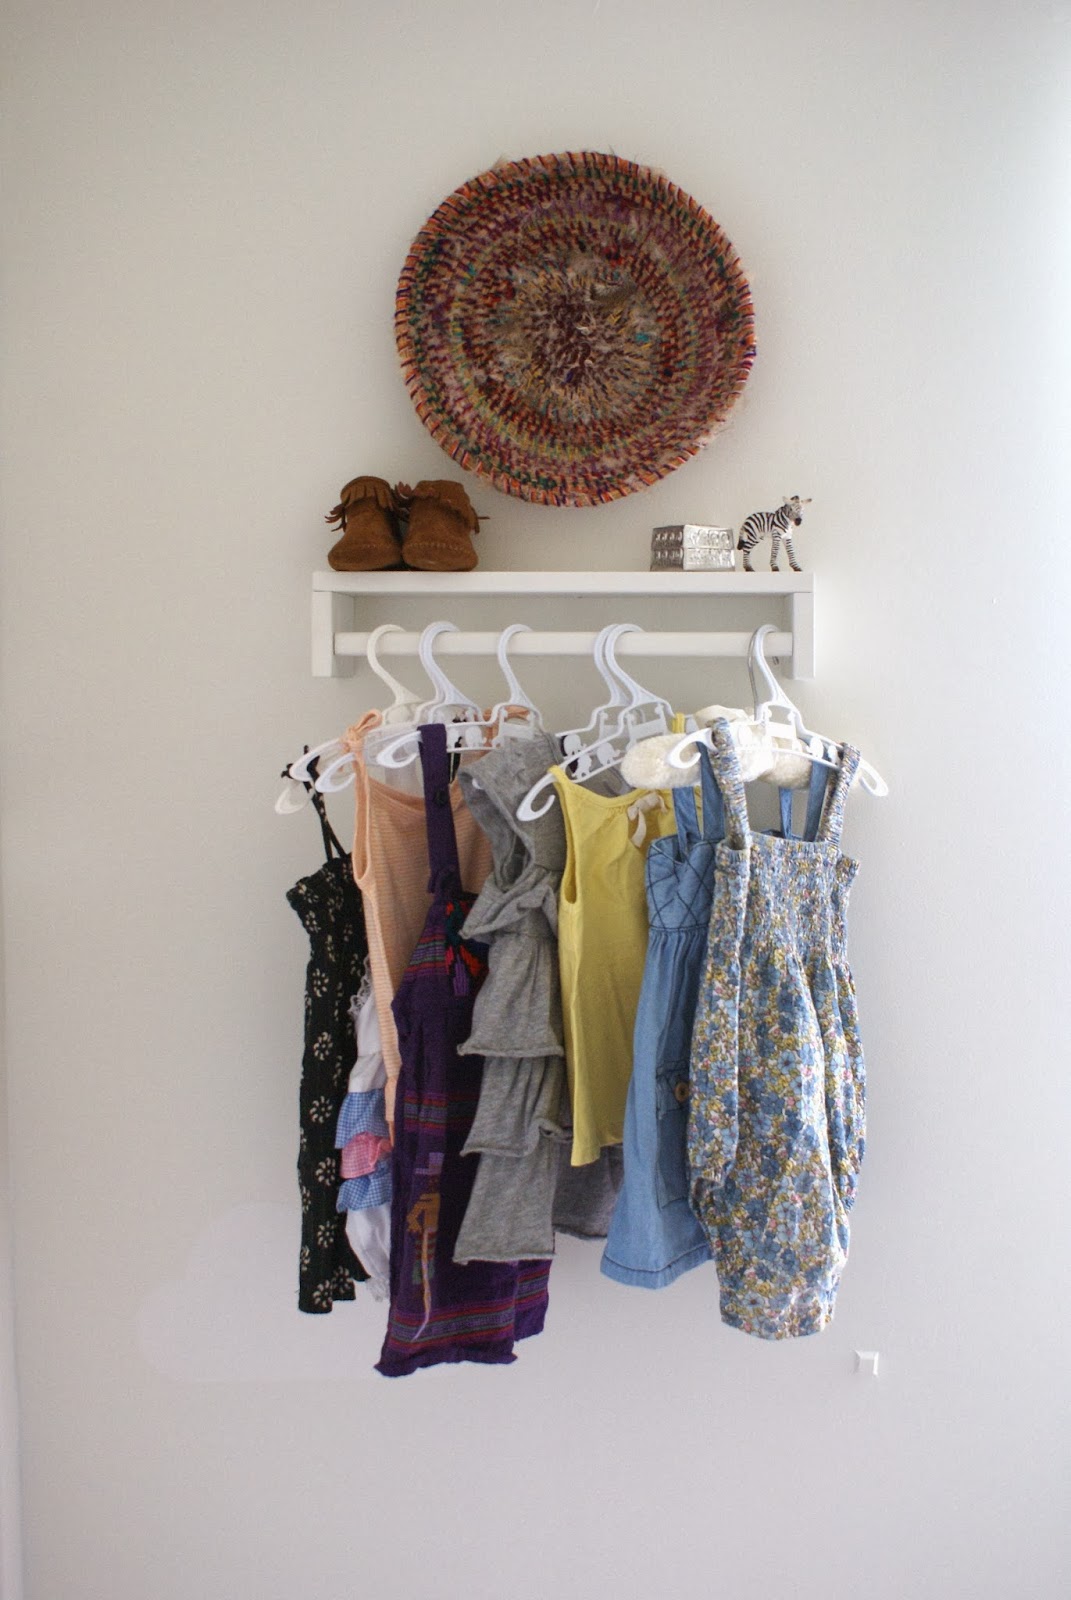 DIy Ikea spice rack hack clothing rack These 20 Ikea Spice Rack Hacks Will Save Your Cluttered Corners